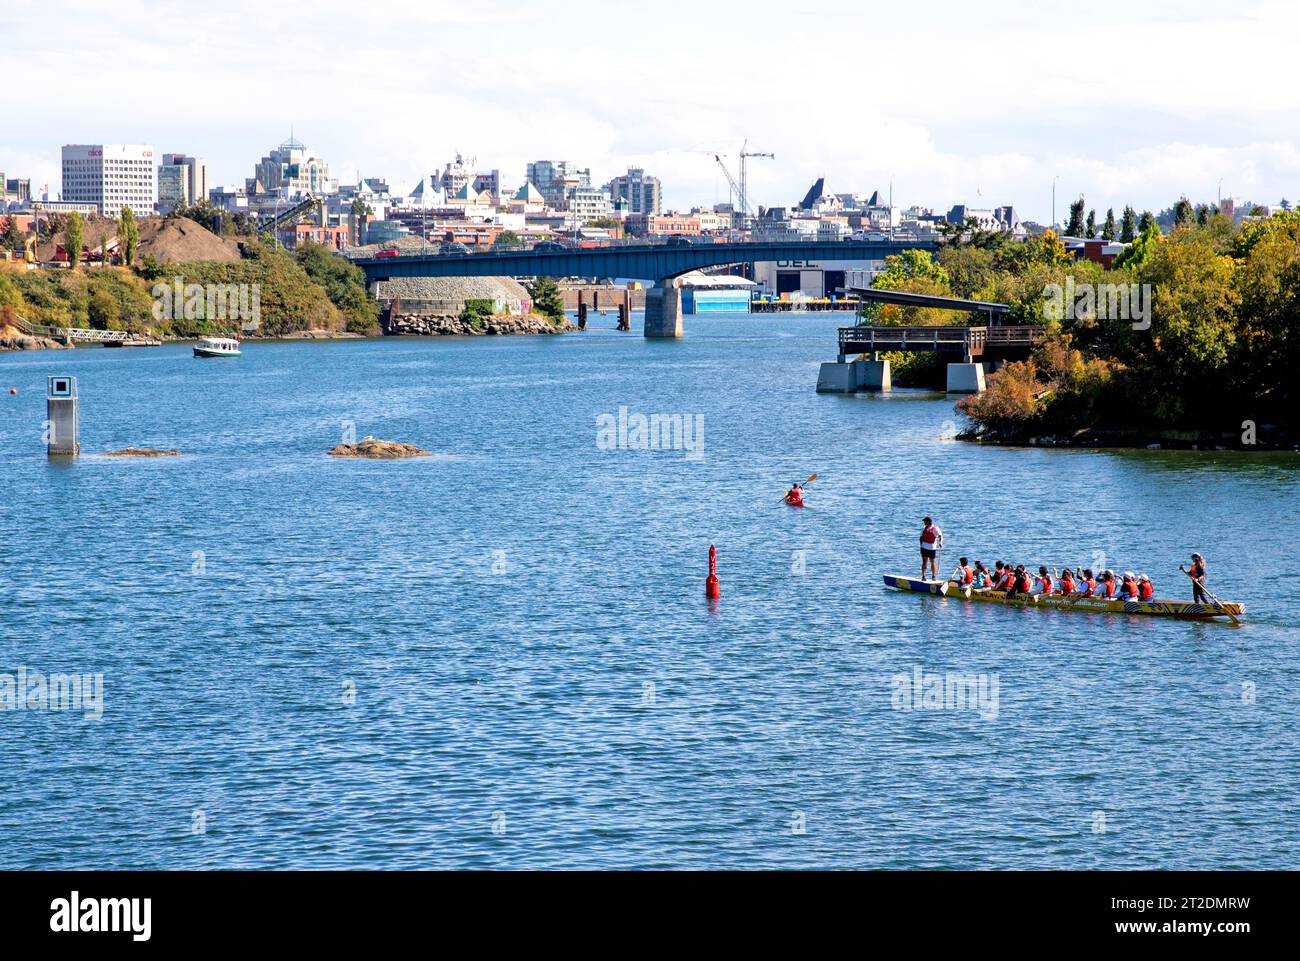 Dragon boat on the Gorge Waterway in Victoria, Vancouver Island Stock Photo